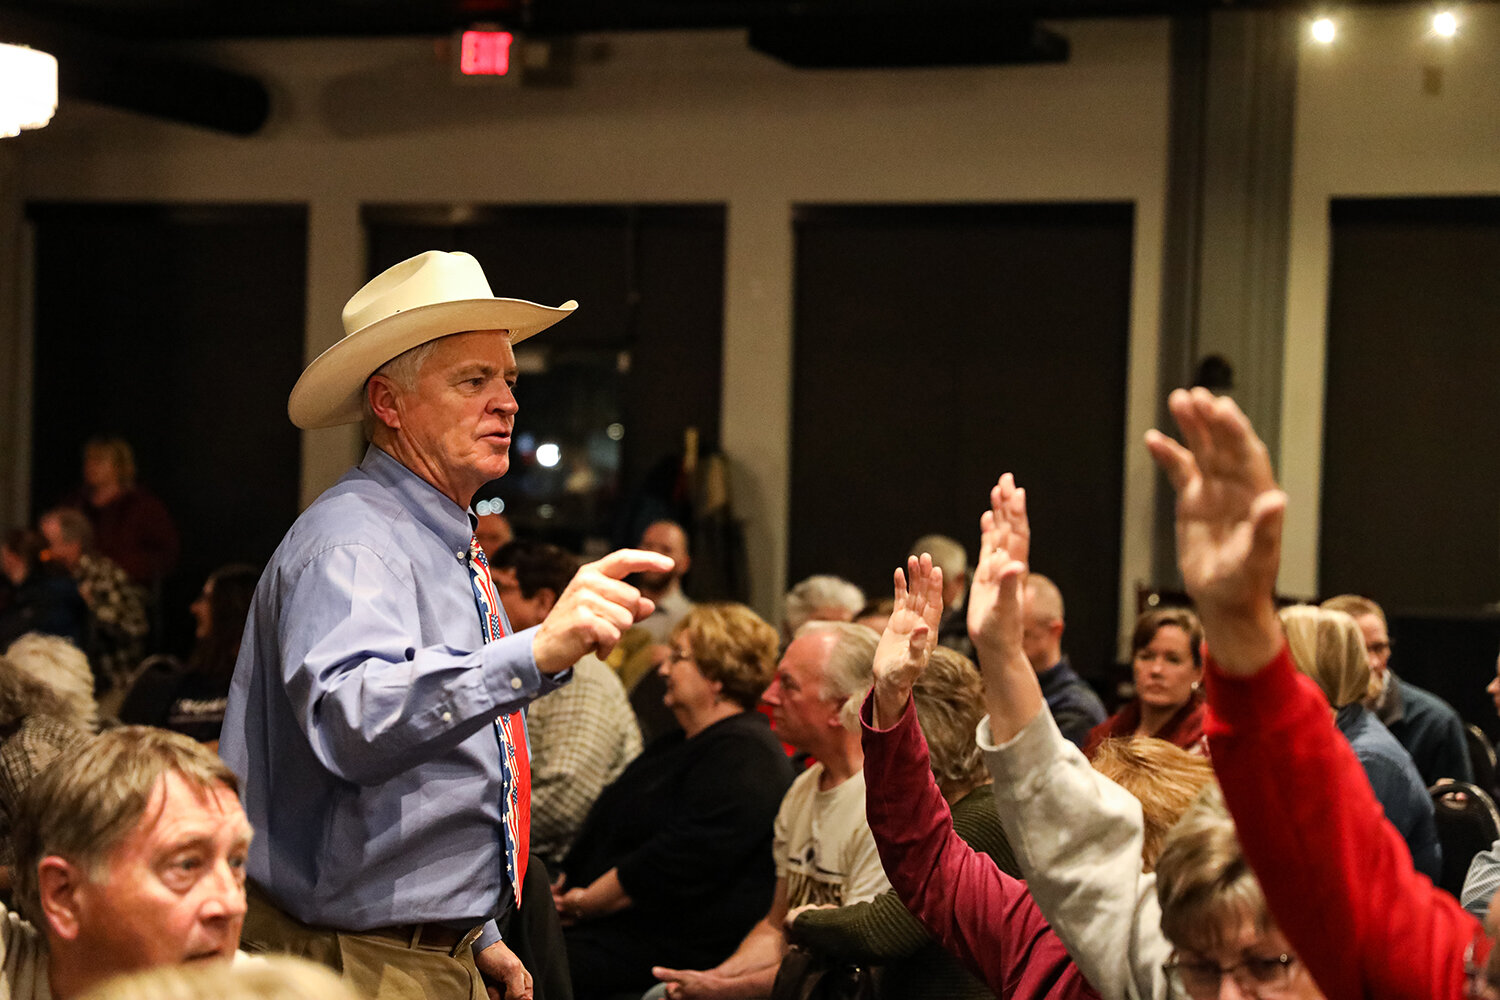  Precinct Chair TR Sandersfeld counts votes for President Trump during the Republican Party Caucus at the Butcher Block Steakhouse in Cedar Rapids, IA on Monday, Feb 3, 2020.  